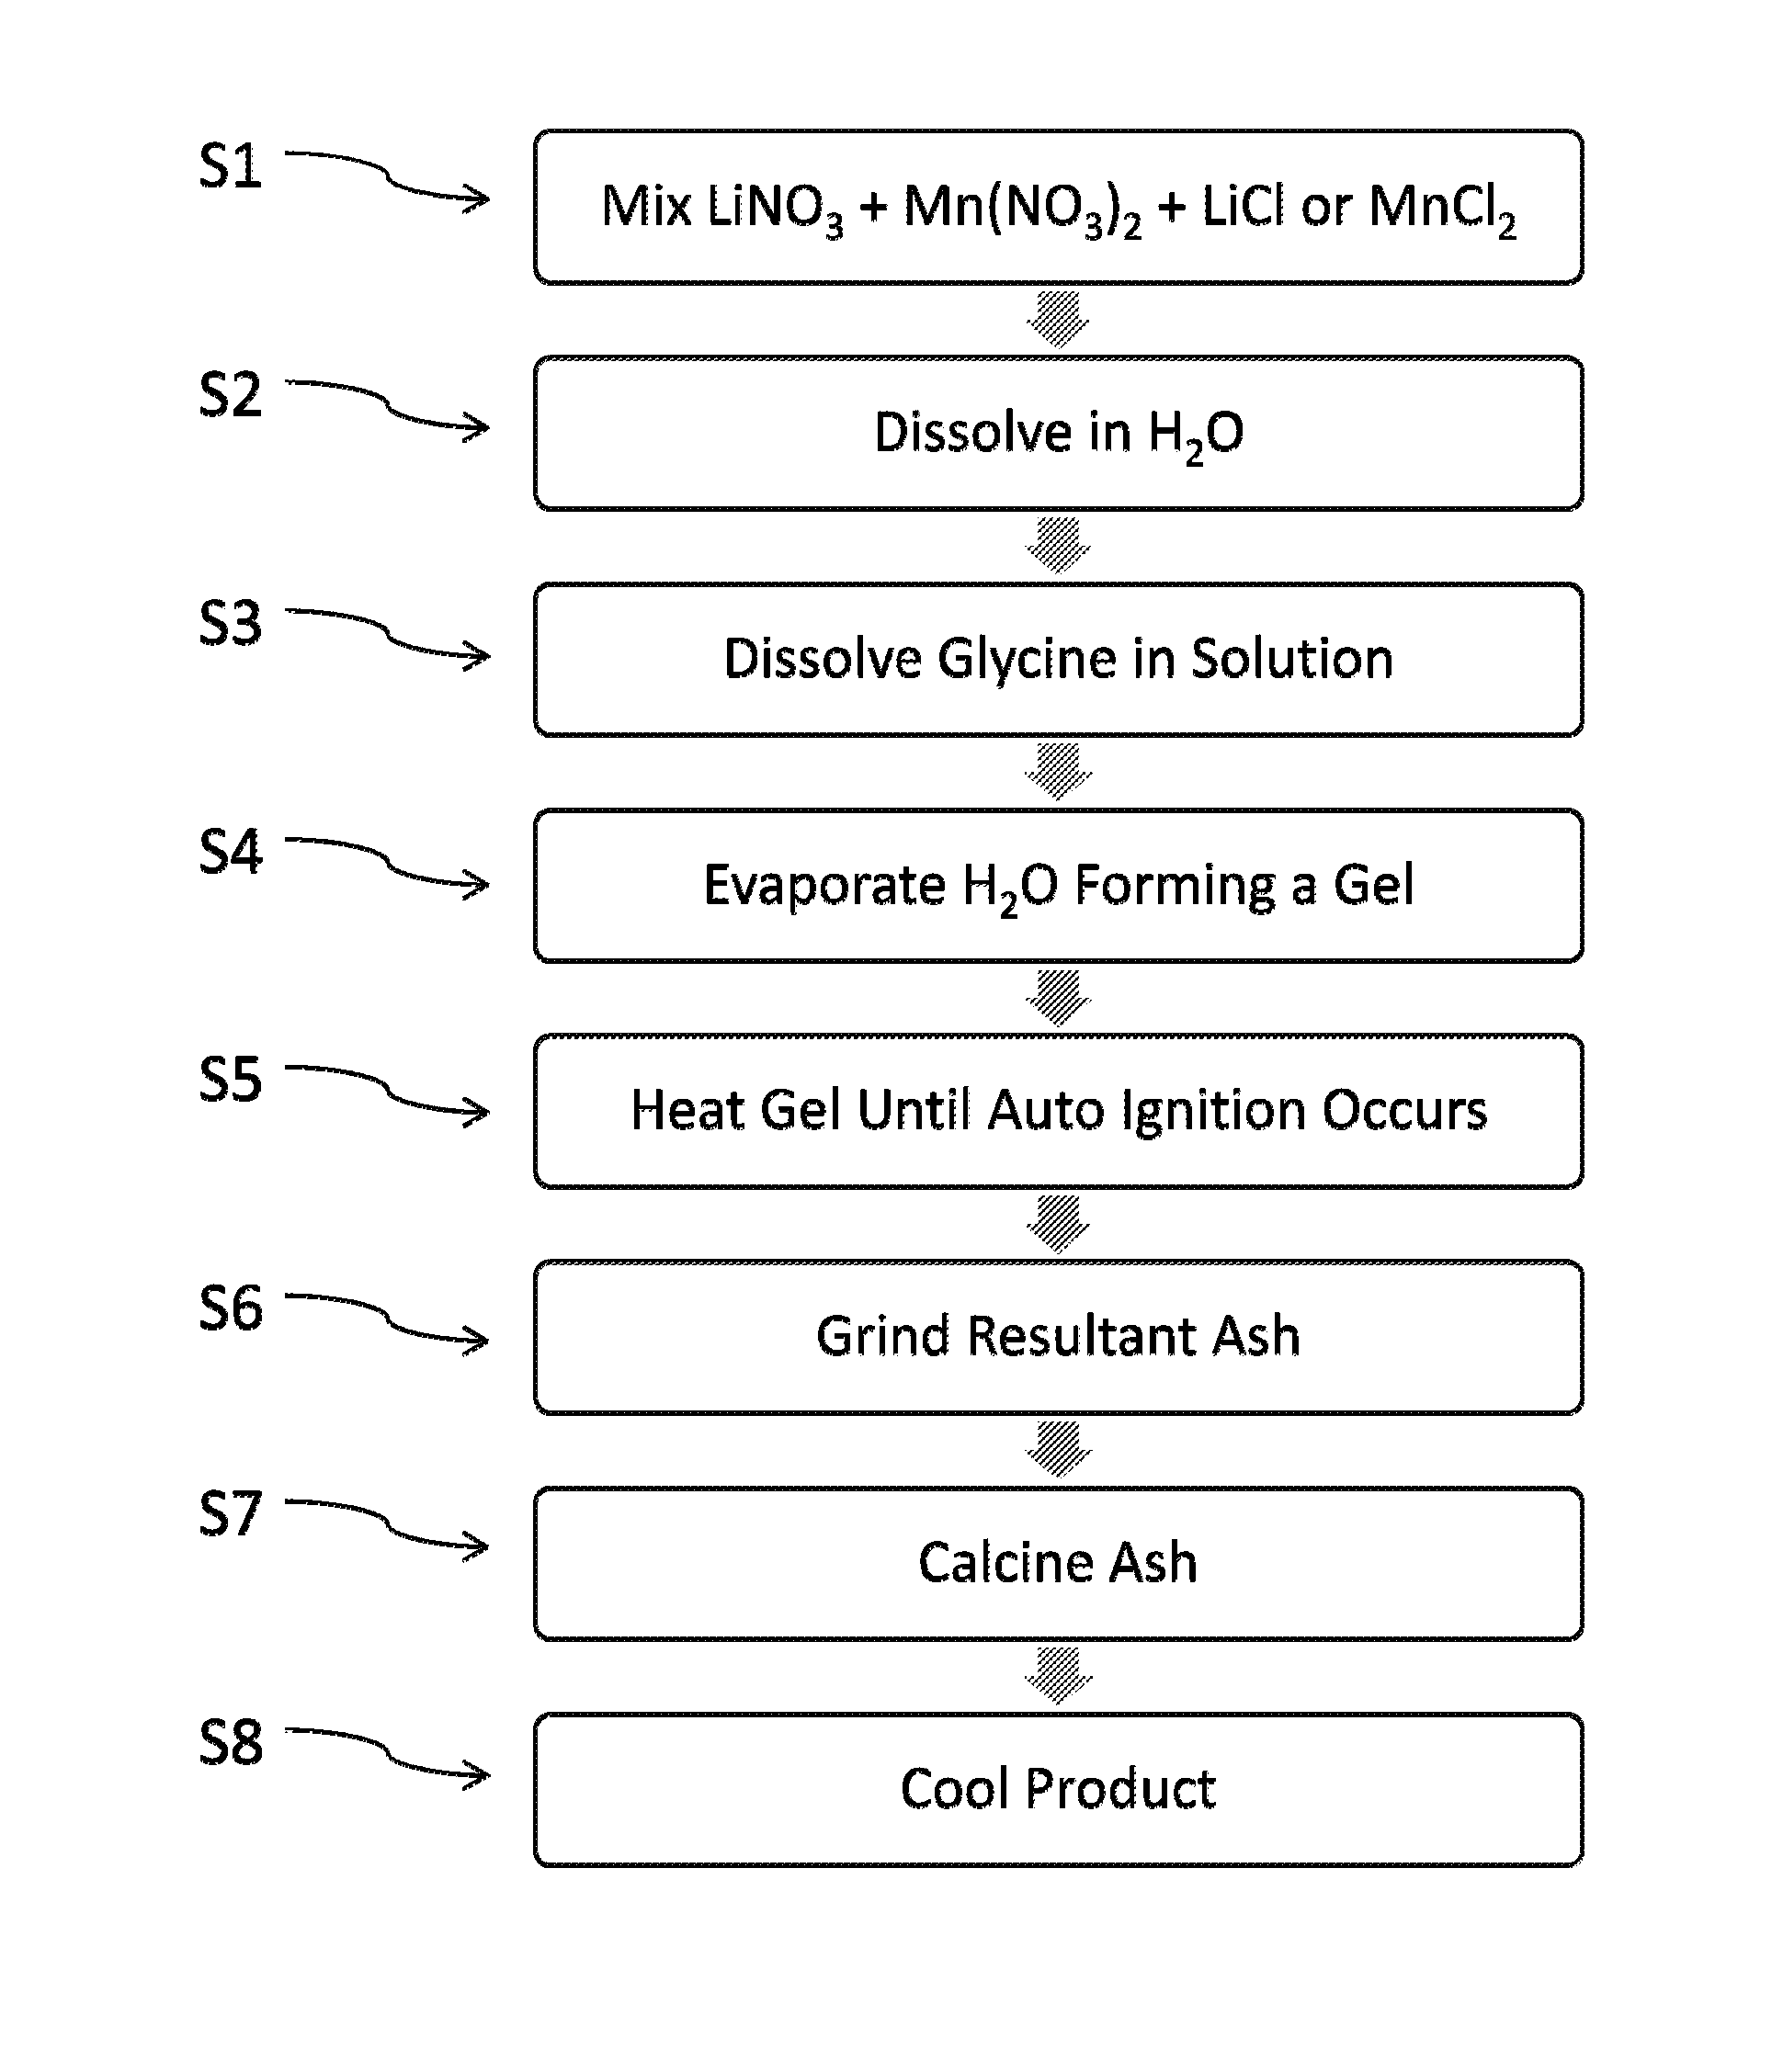 LixMn2O4-y(Clz) SPINEL CATHODE MATERIAL, METHOD OF PREPARING THE SAME, AND RECHARGEABLE LITHIUM AND LI-ION ELECTROCHEMICAL SYSTEMS CONTAINING THE SAME